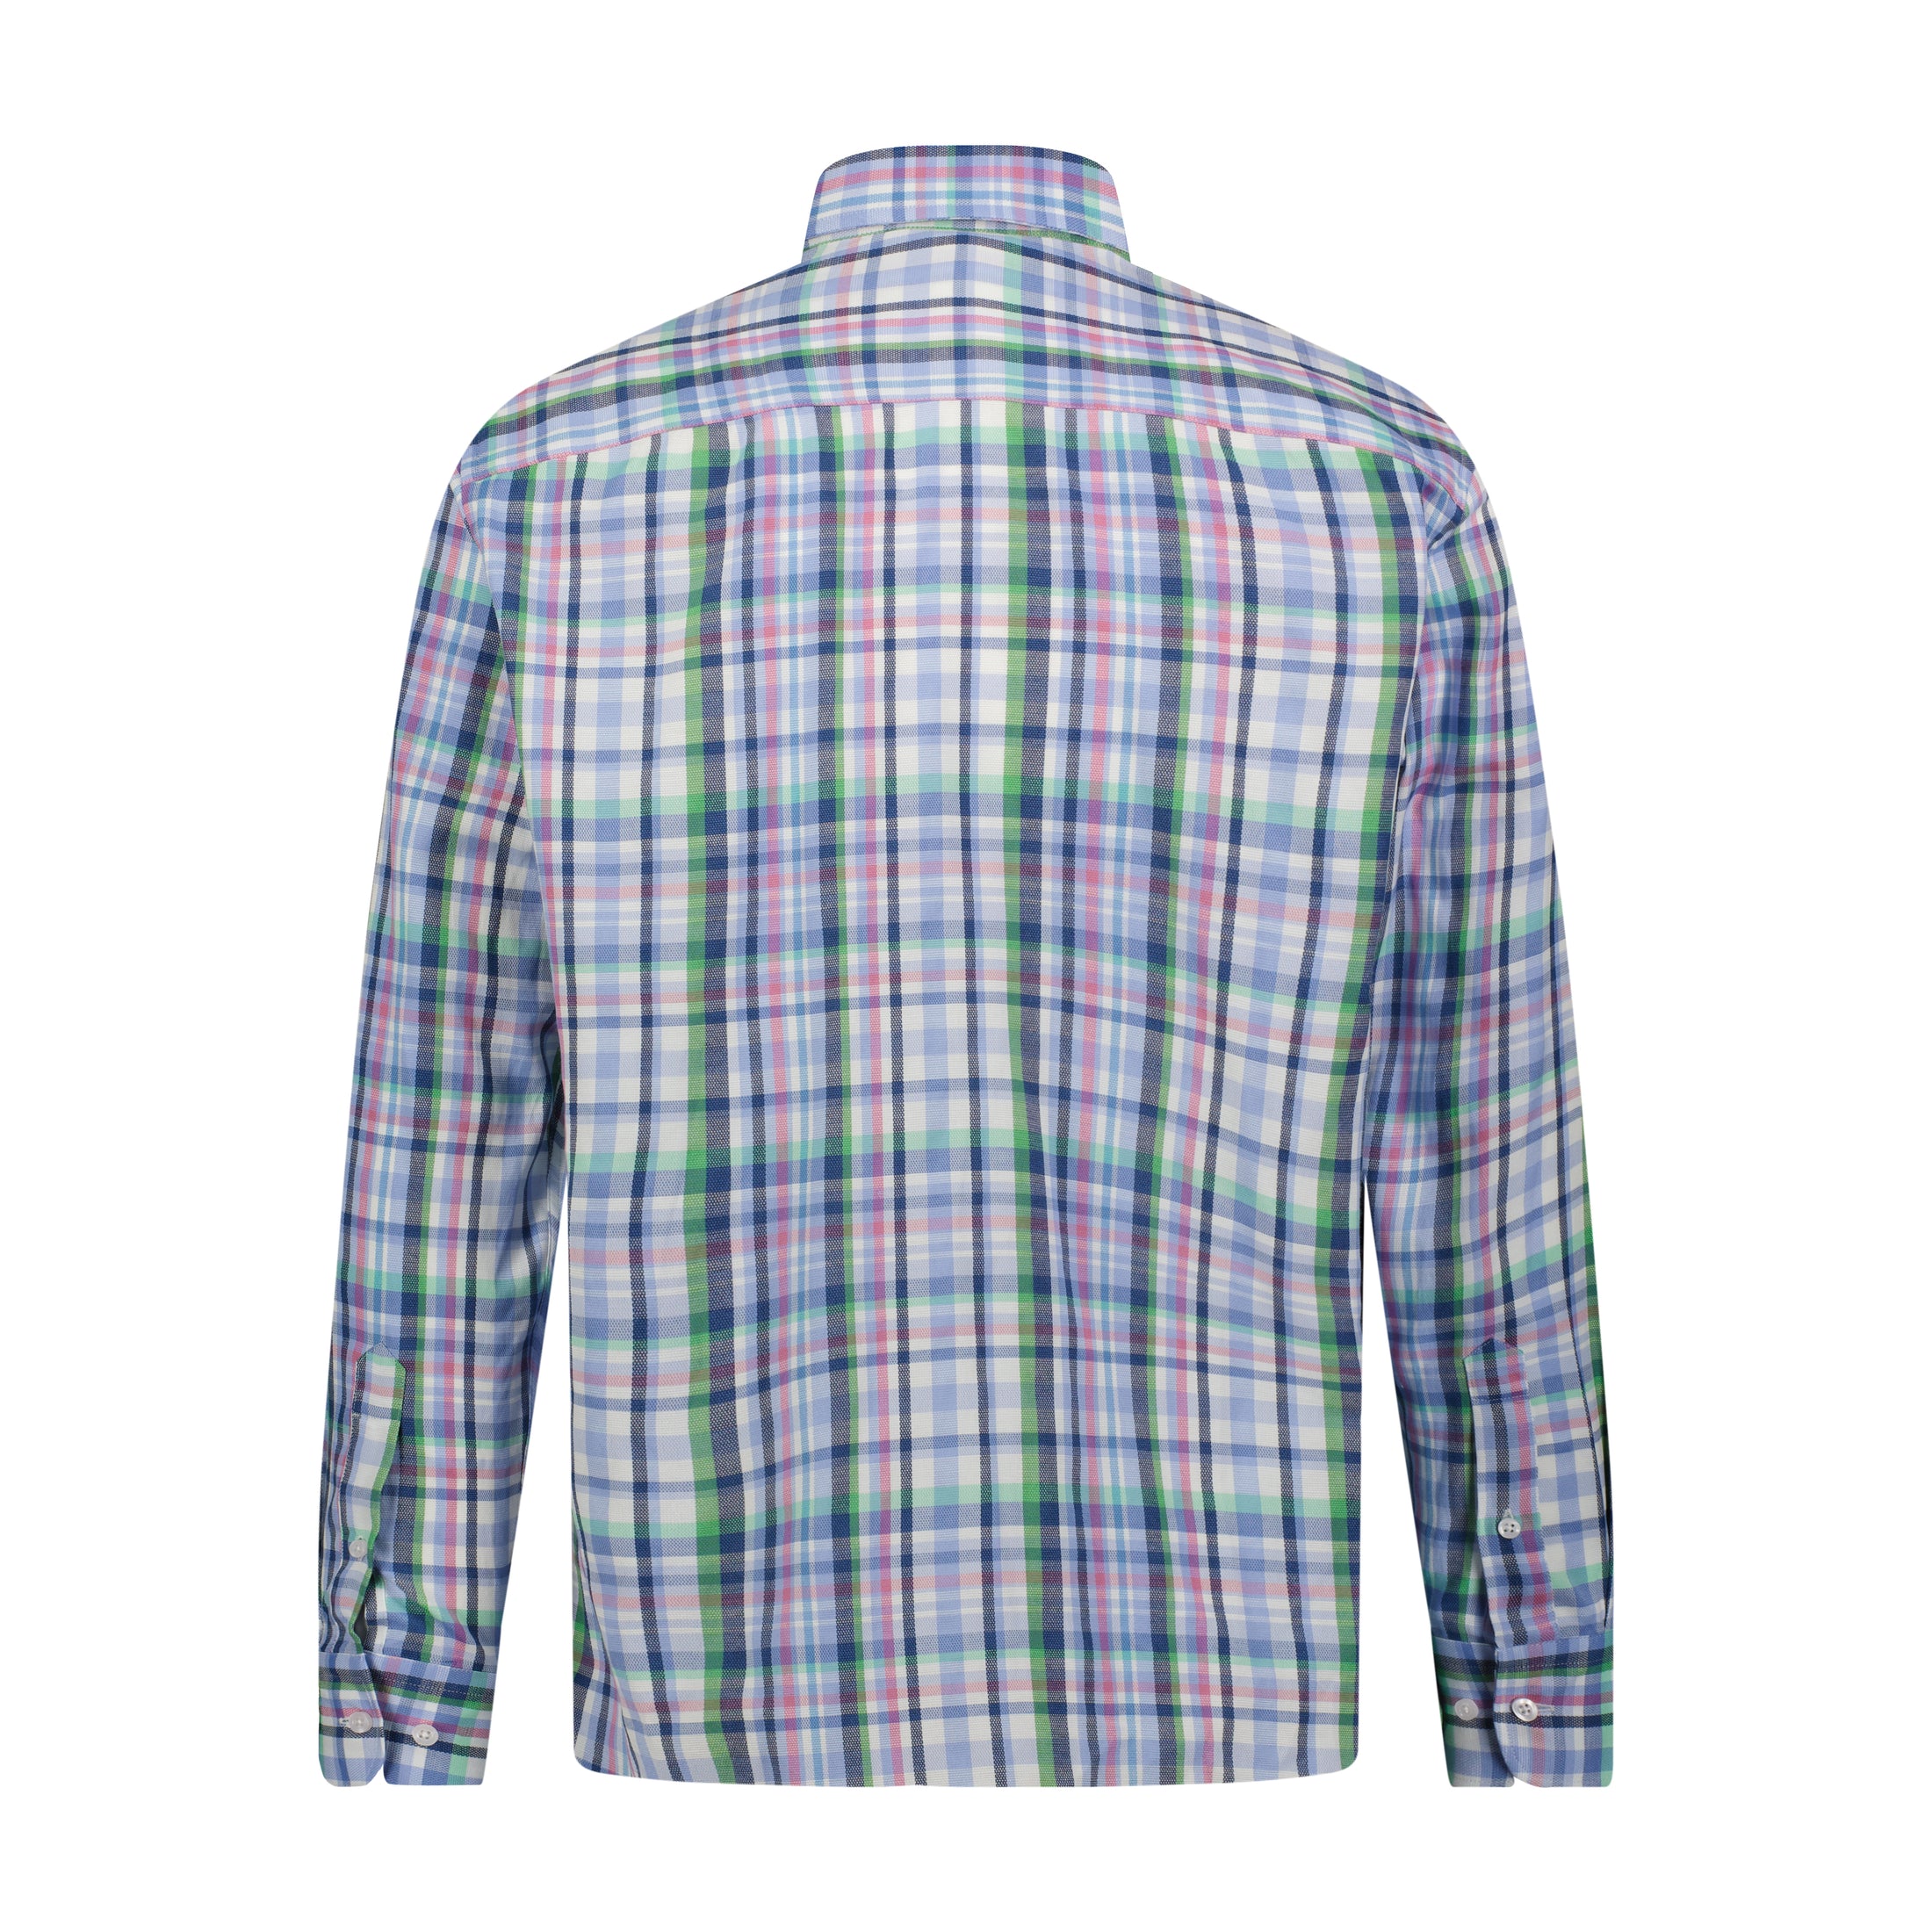 Purple Navy White and Green Plaid Oxford Long Sleeve Shirt